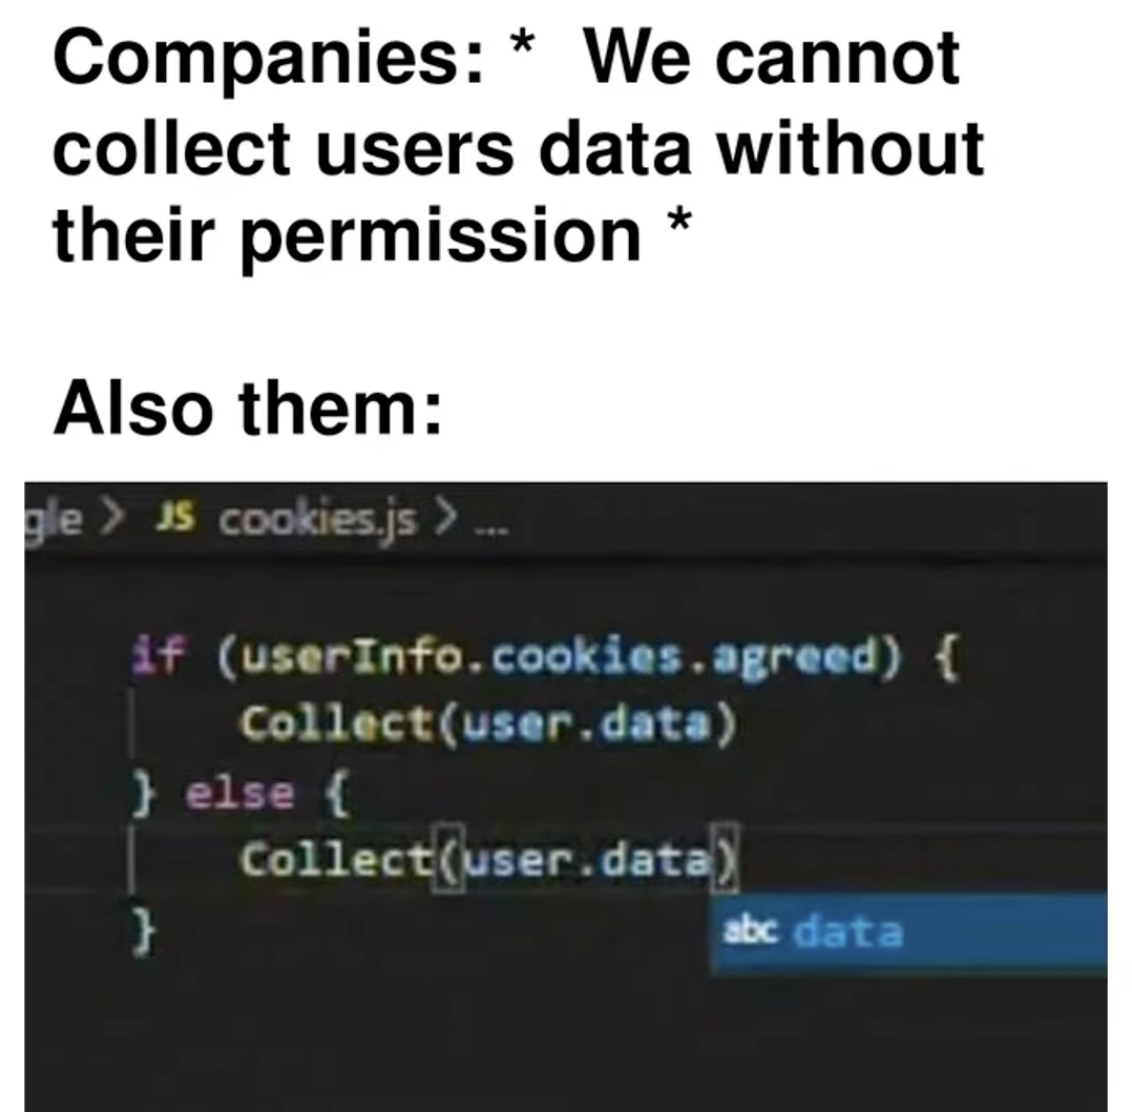 funny gaming memes - duolingo funny texts - Companies We cannot collect users data without their permission Also them ale > Js cookies.js > if userInfo.cookies. agreed { Collectuser.data } else { Collectuser.data } abc data